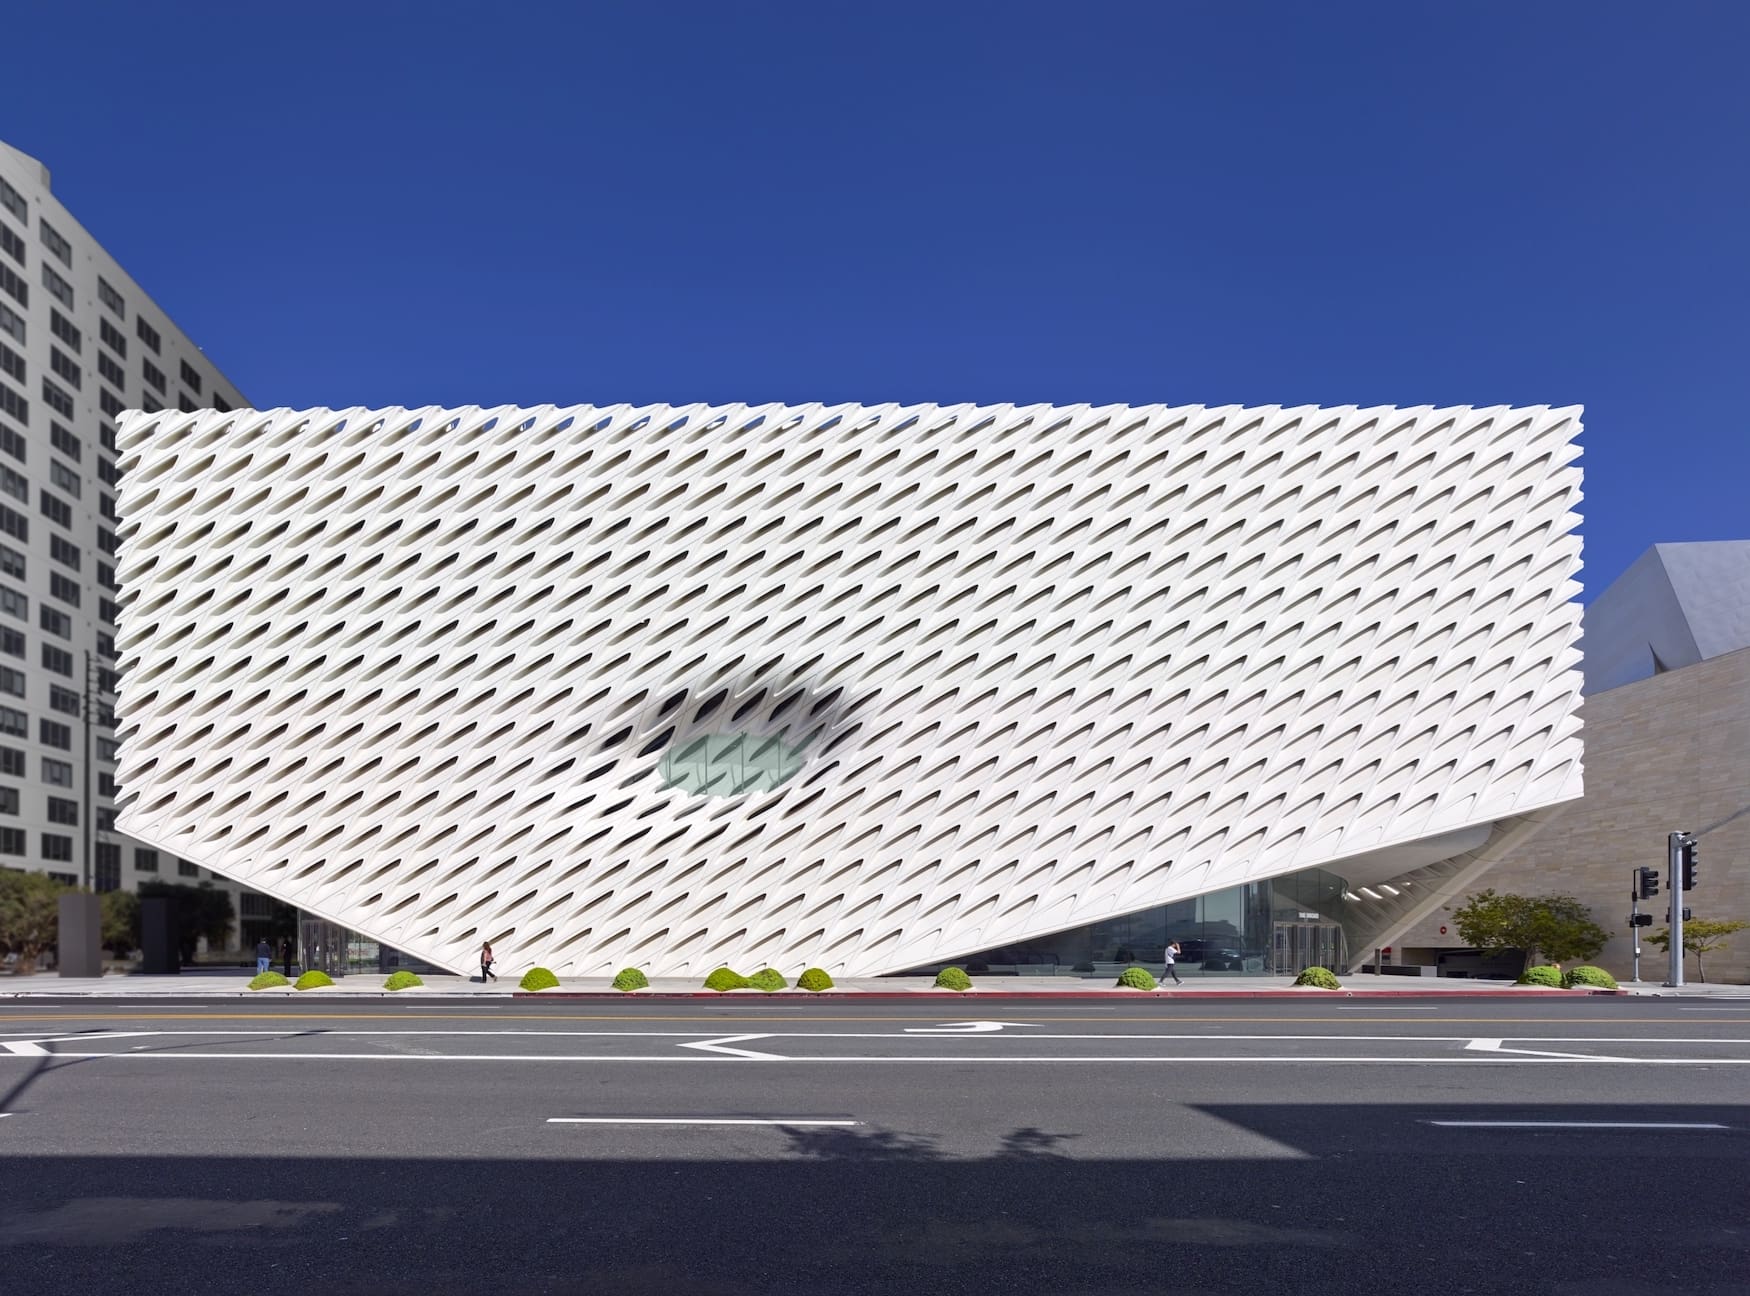 The Broad Museum in Los Angeles